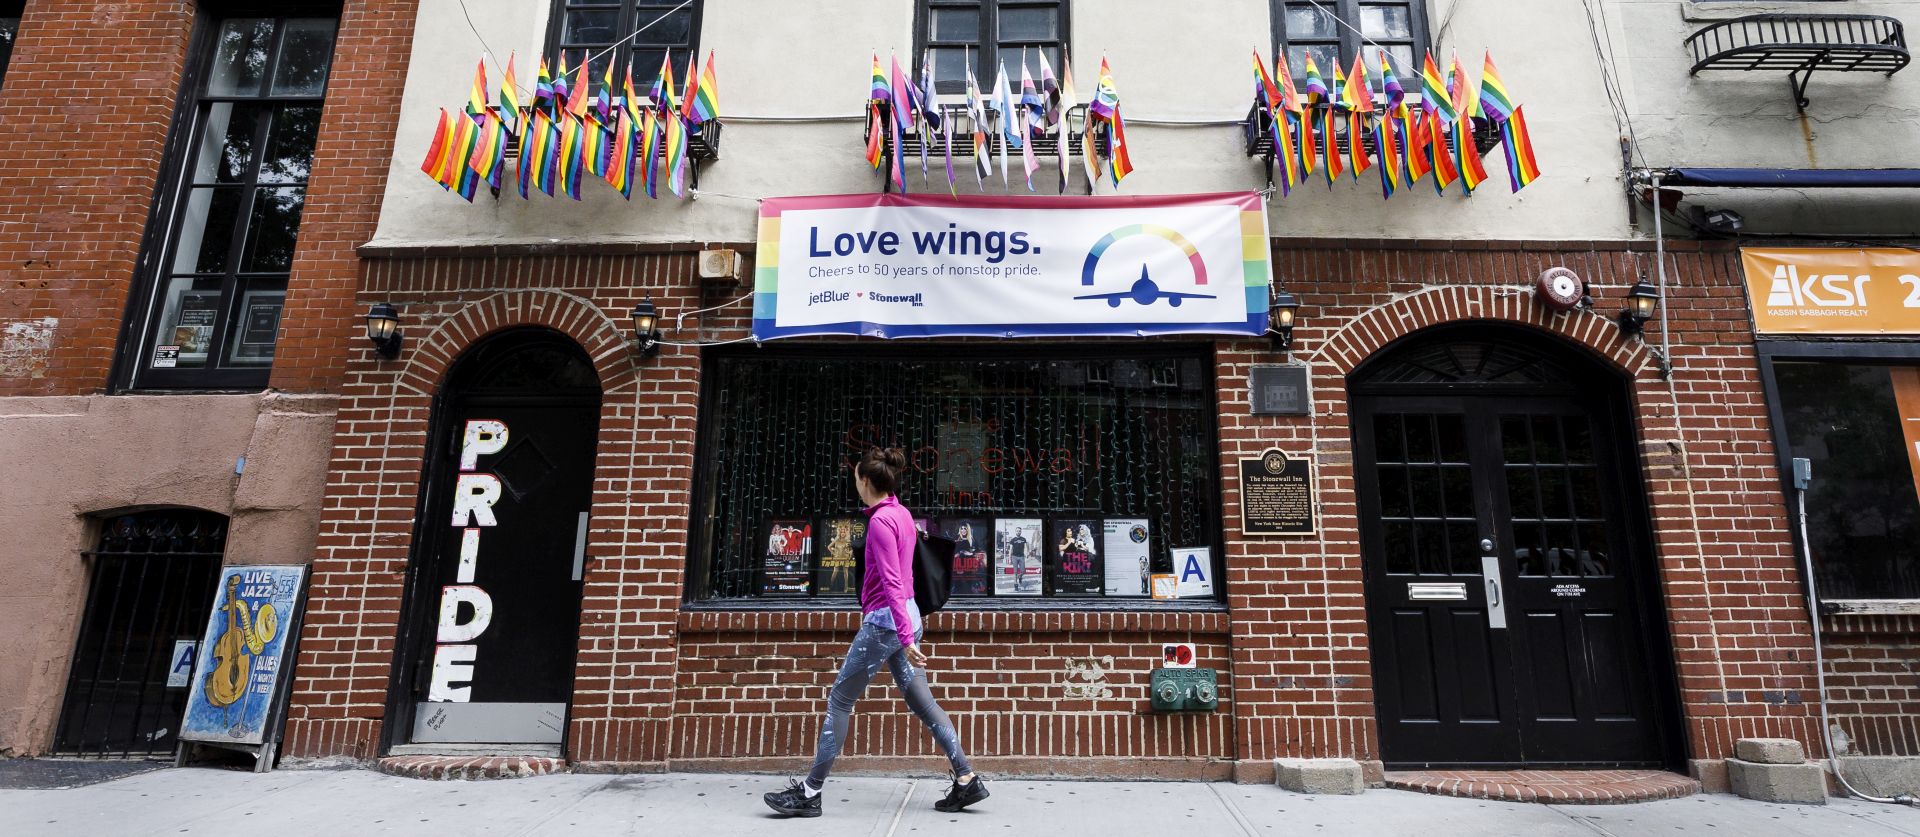 epa07663424 A view of the front of the Stonewall Inn, a bar in the Greenwich Village neighborhood of New York, New York, USA, 17 June 2019 (issued 21 June 2019). In 1969, a police raid the Stonewall Inn to enforce laws against selling alcohol to 'homosexuals' sparked large protests in the city's gay community, known as the 'Stonewall Uprising', which became the start of the L.G.B.T. civil rights movement in the United States. The bar and the nearby park were designated as the Stonewall National Park by the federal government in 2016, becoming the first national park dedicated to the gay rights movement. The 50th anniversary of the Stonewall Uprising is being commemorated this year as part of LGBT (lesbian, gay, bisexual, and transgender) Pride Month observations.  EPA/JUSTIN LANE